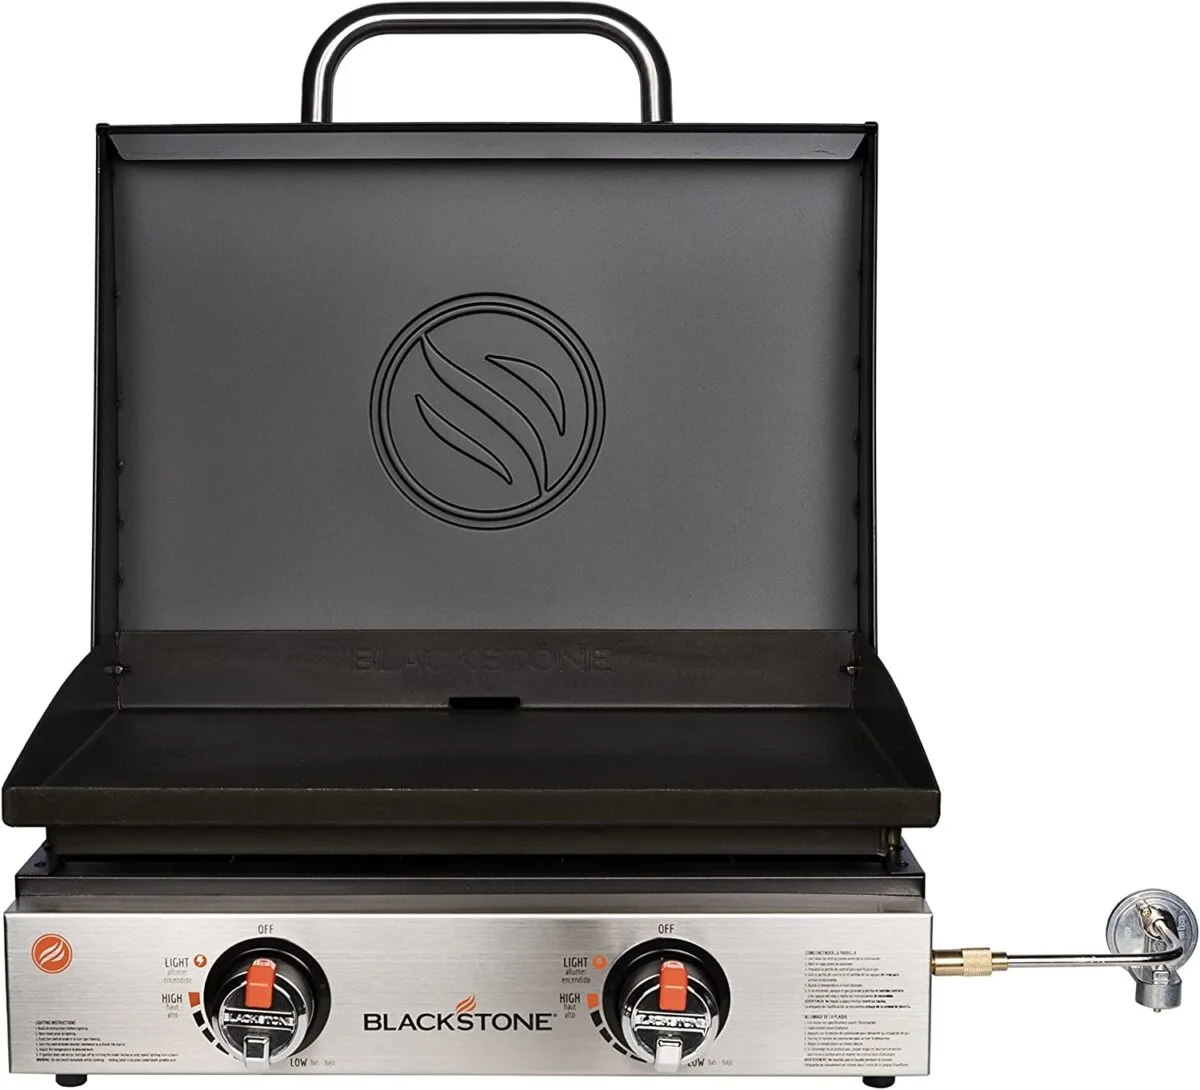 Blackstone Griddle with an open lid